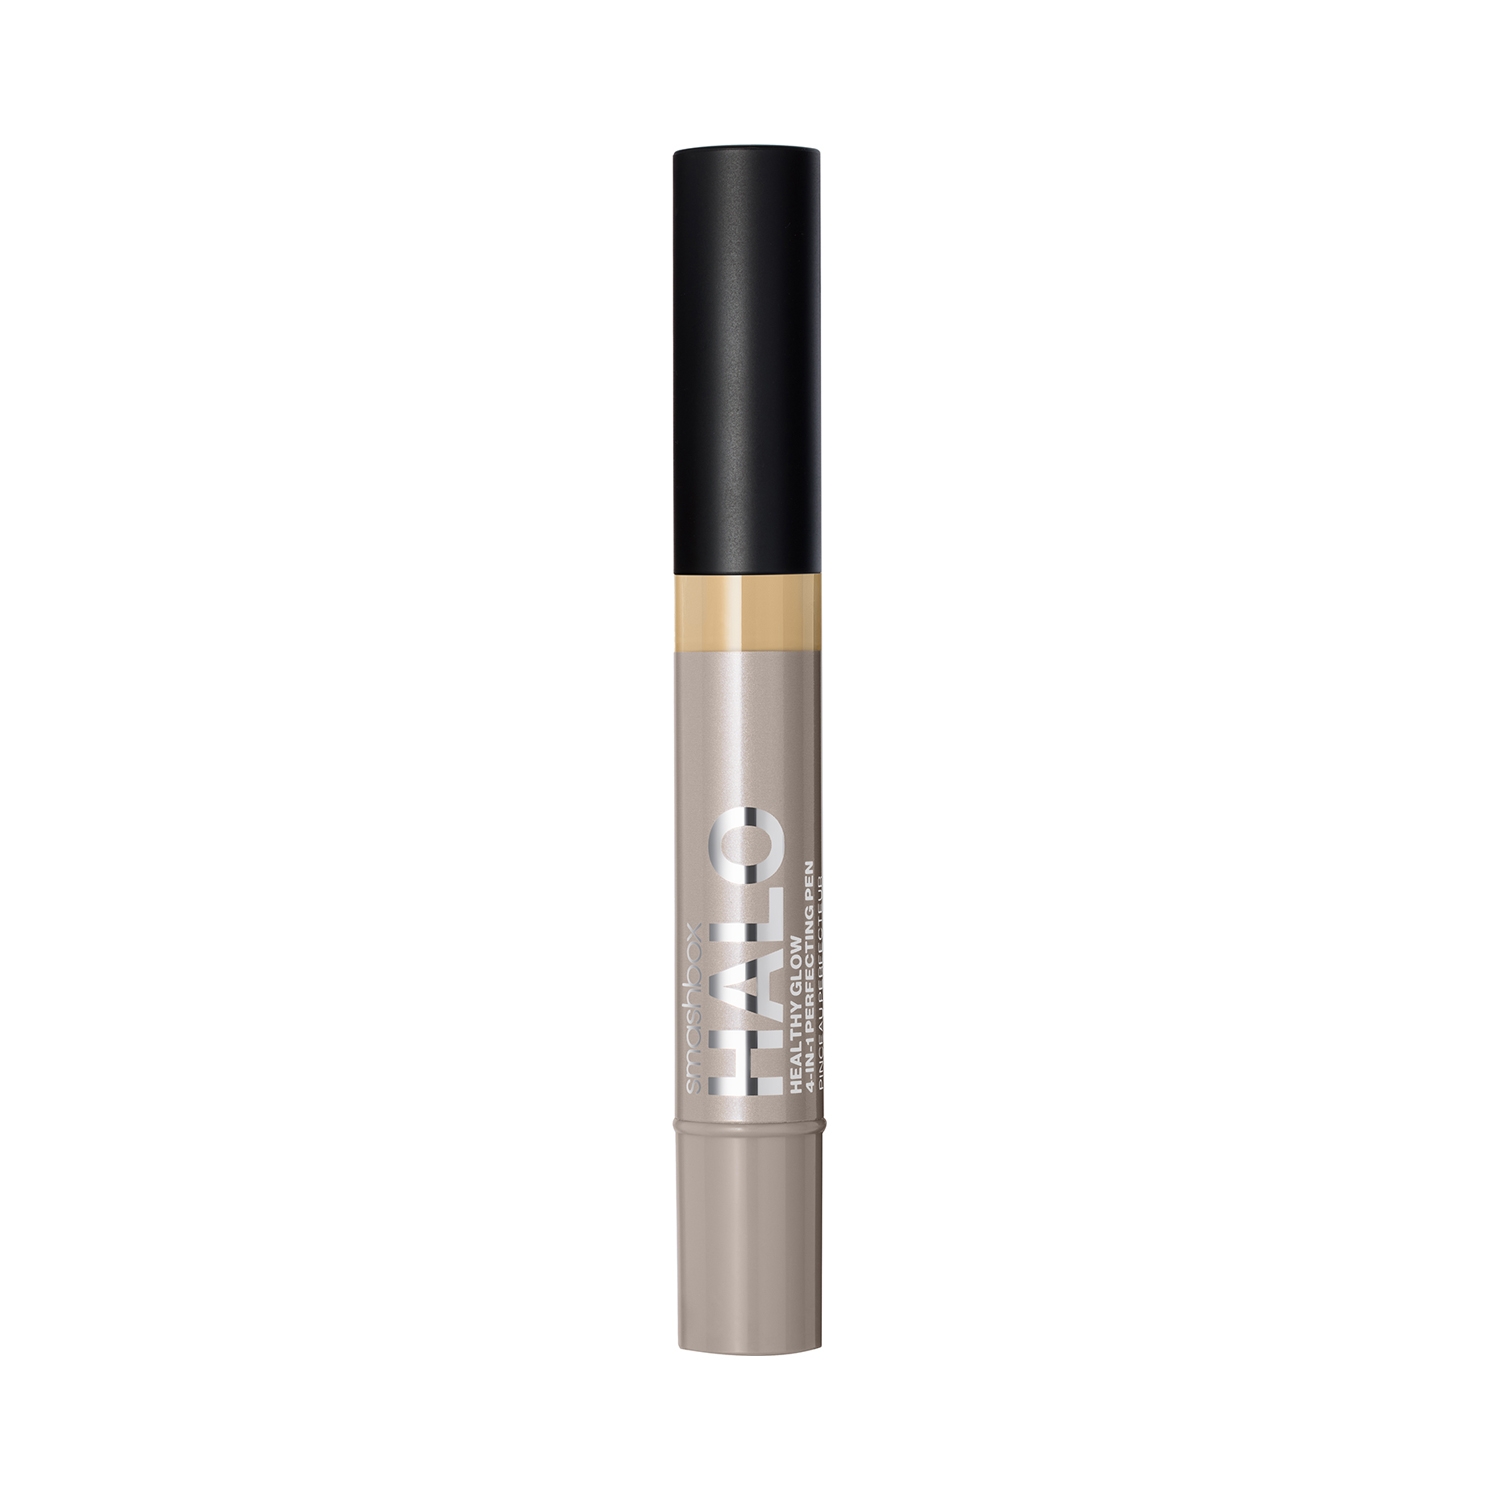 Smashbox | Smashbox Halo Healthy Glow 4-In-1 Perfecting Concealer Pen - L10W (3.5ml)